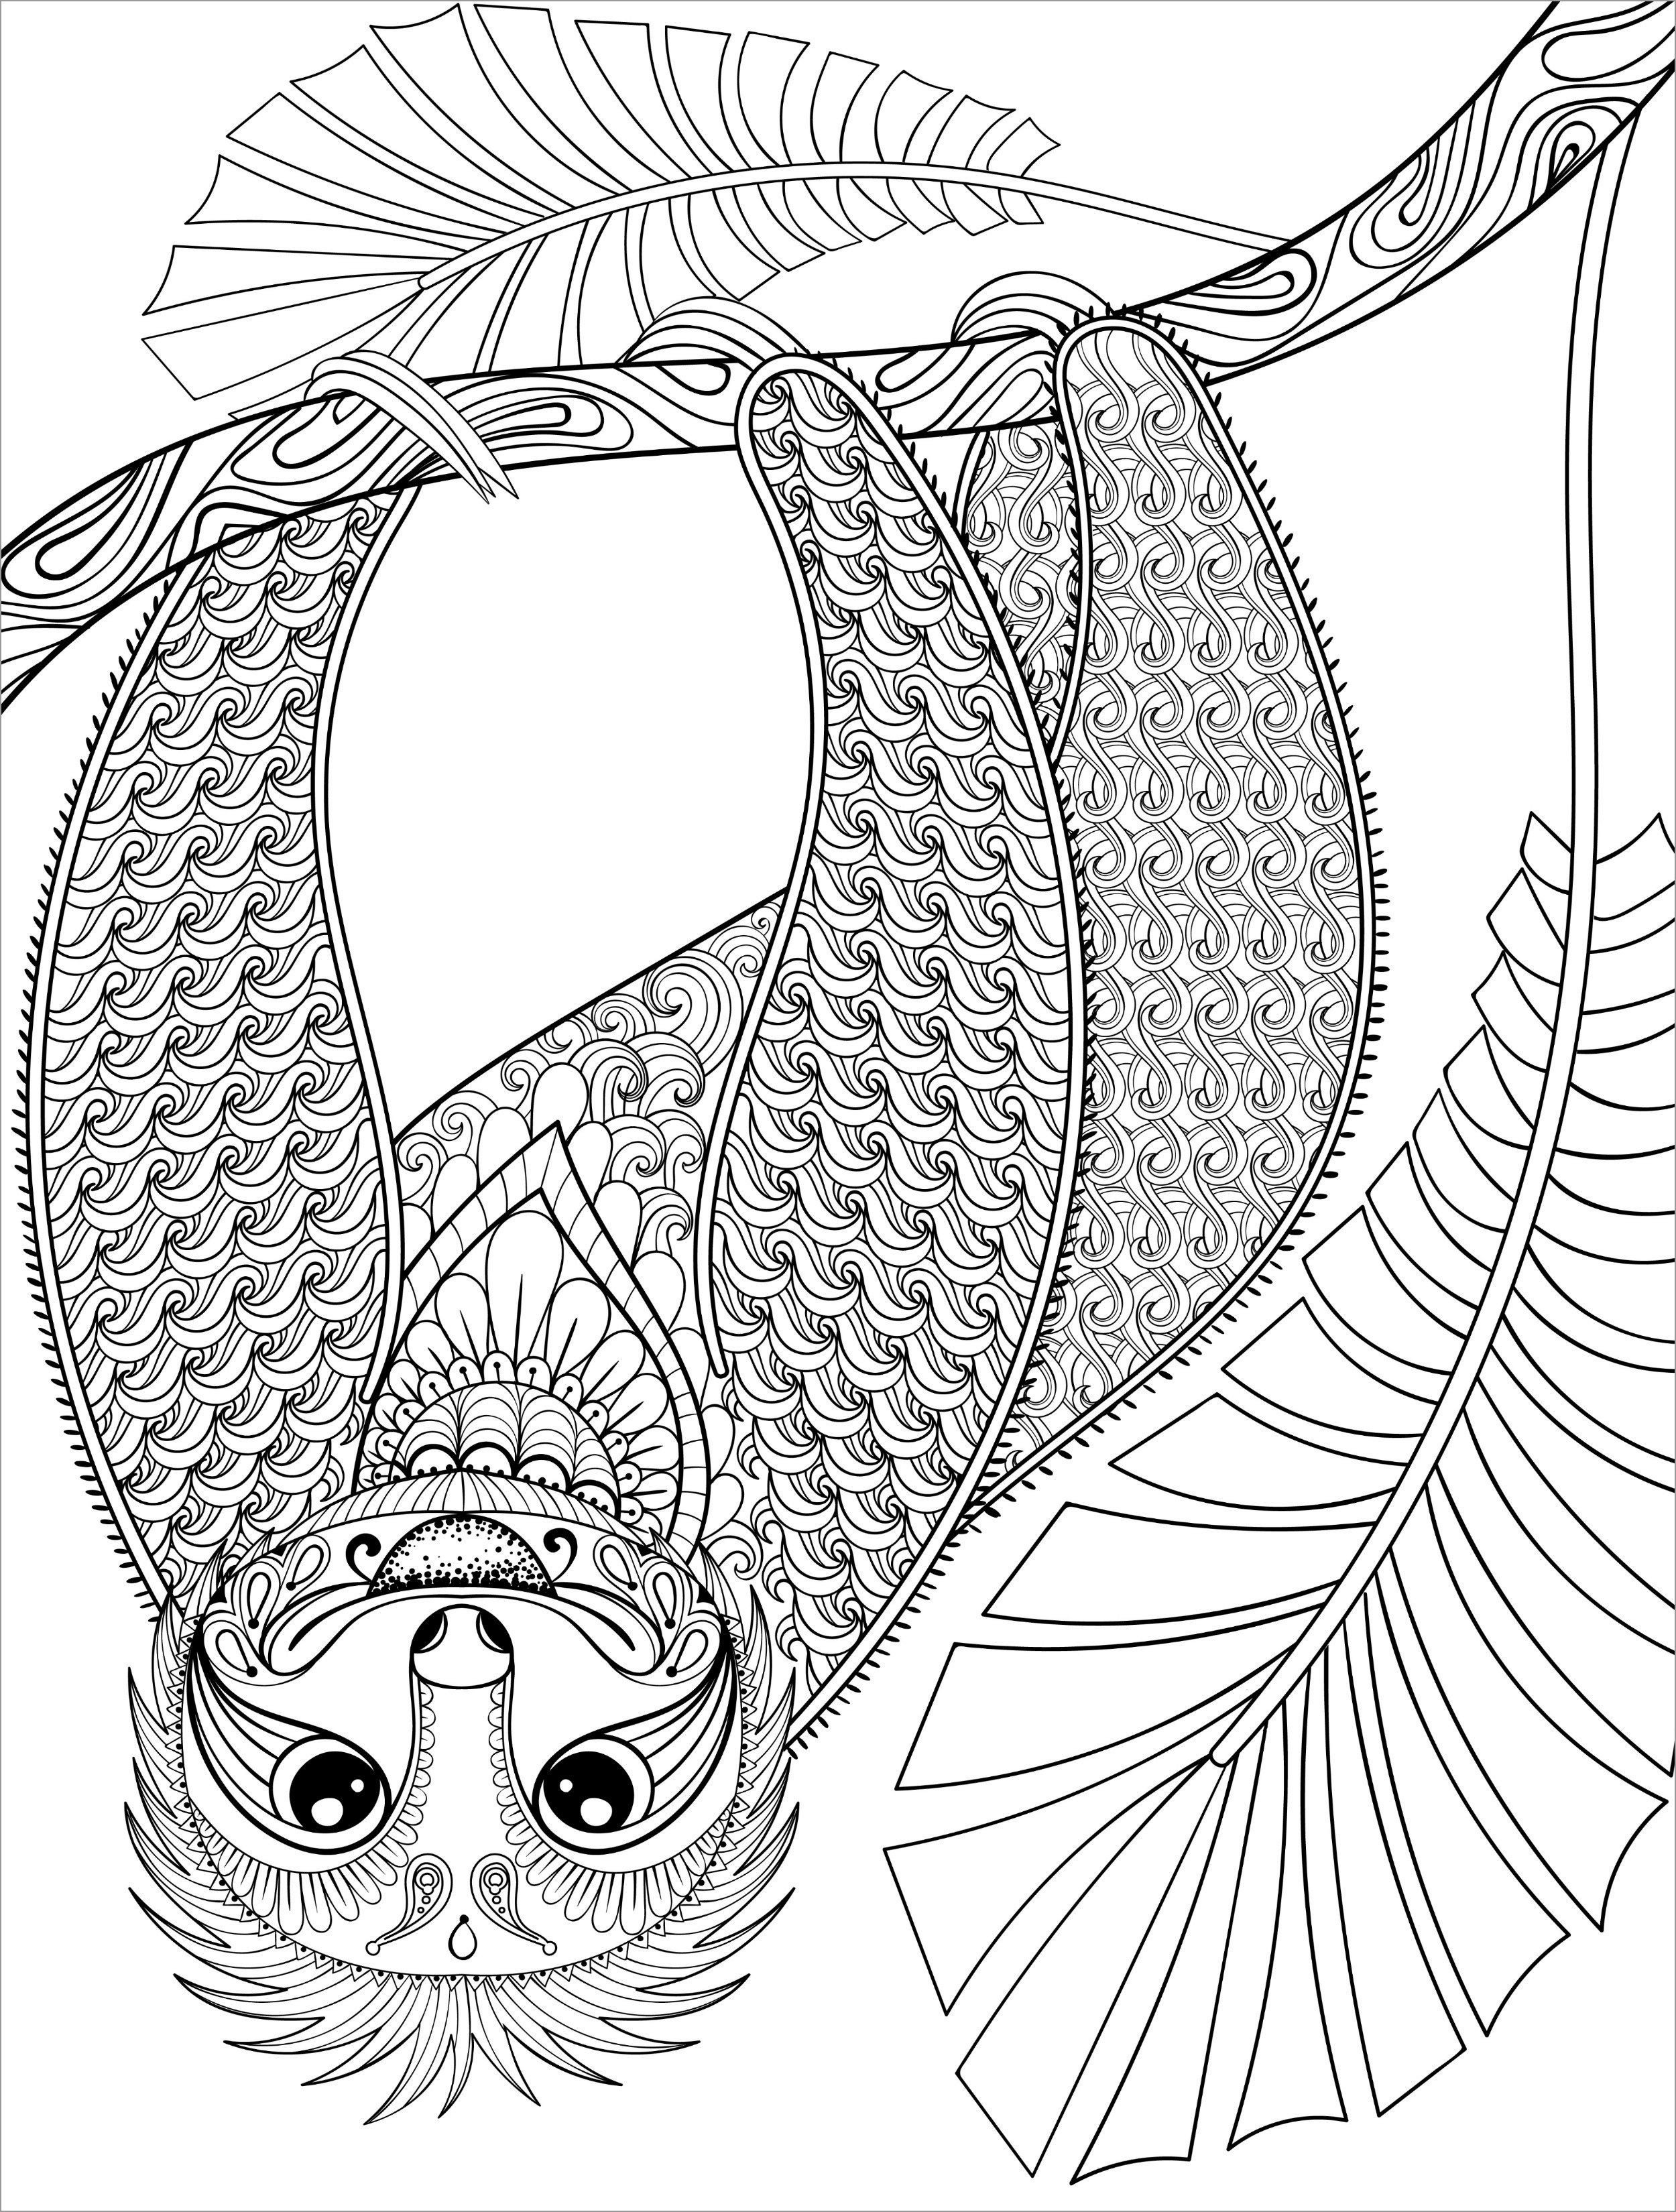 Mandala Sloths Coloring Page for Adult